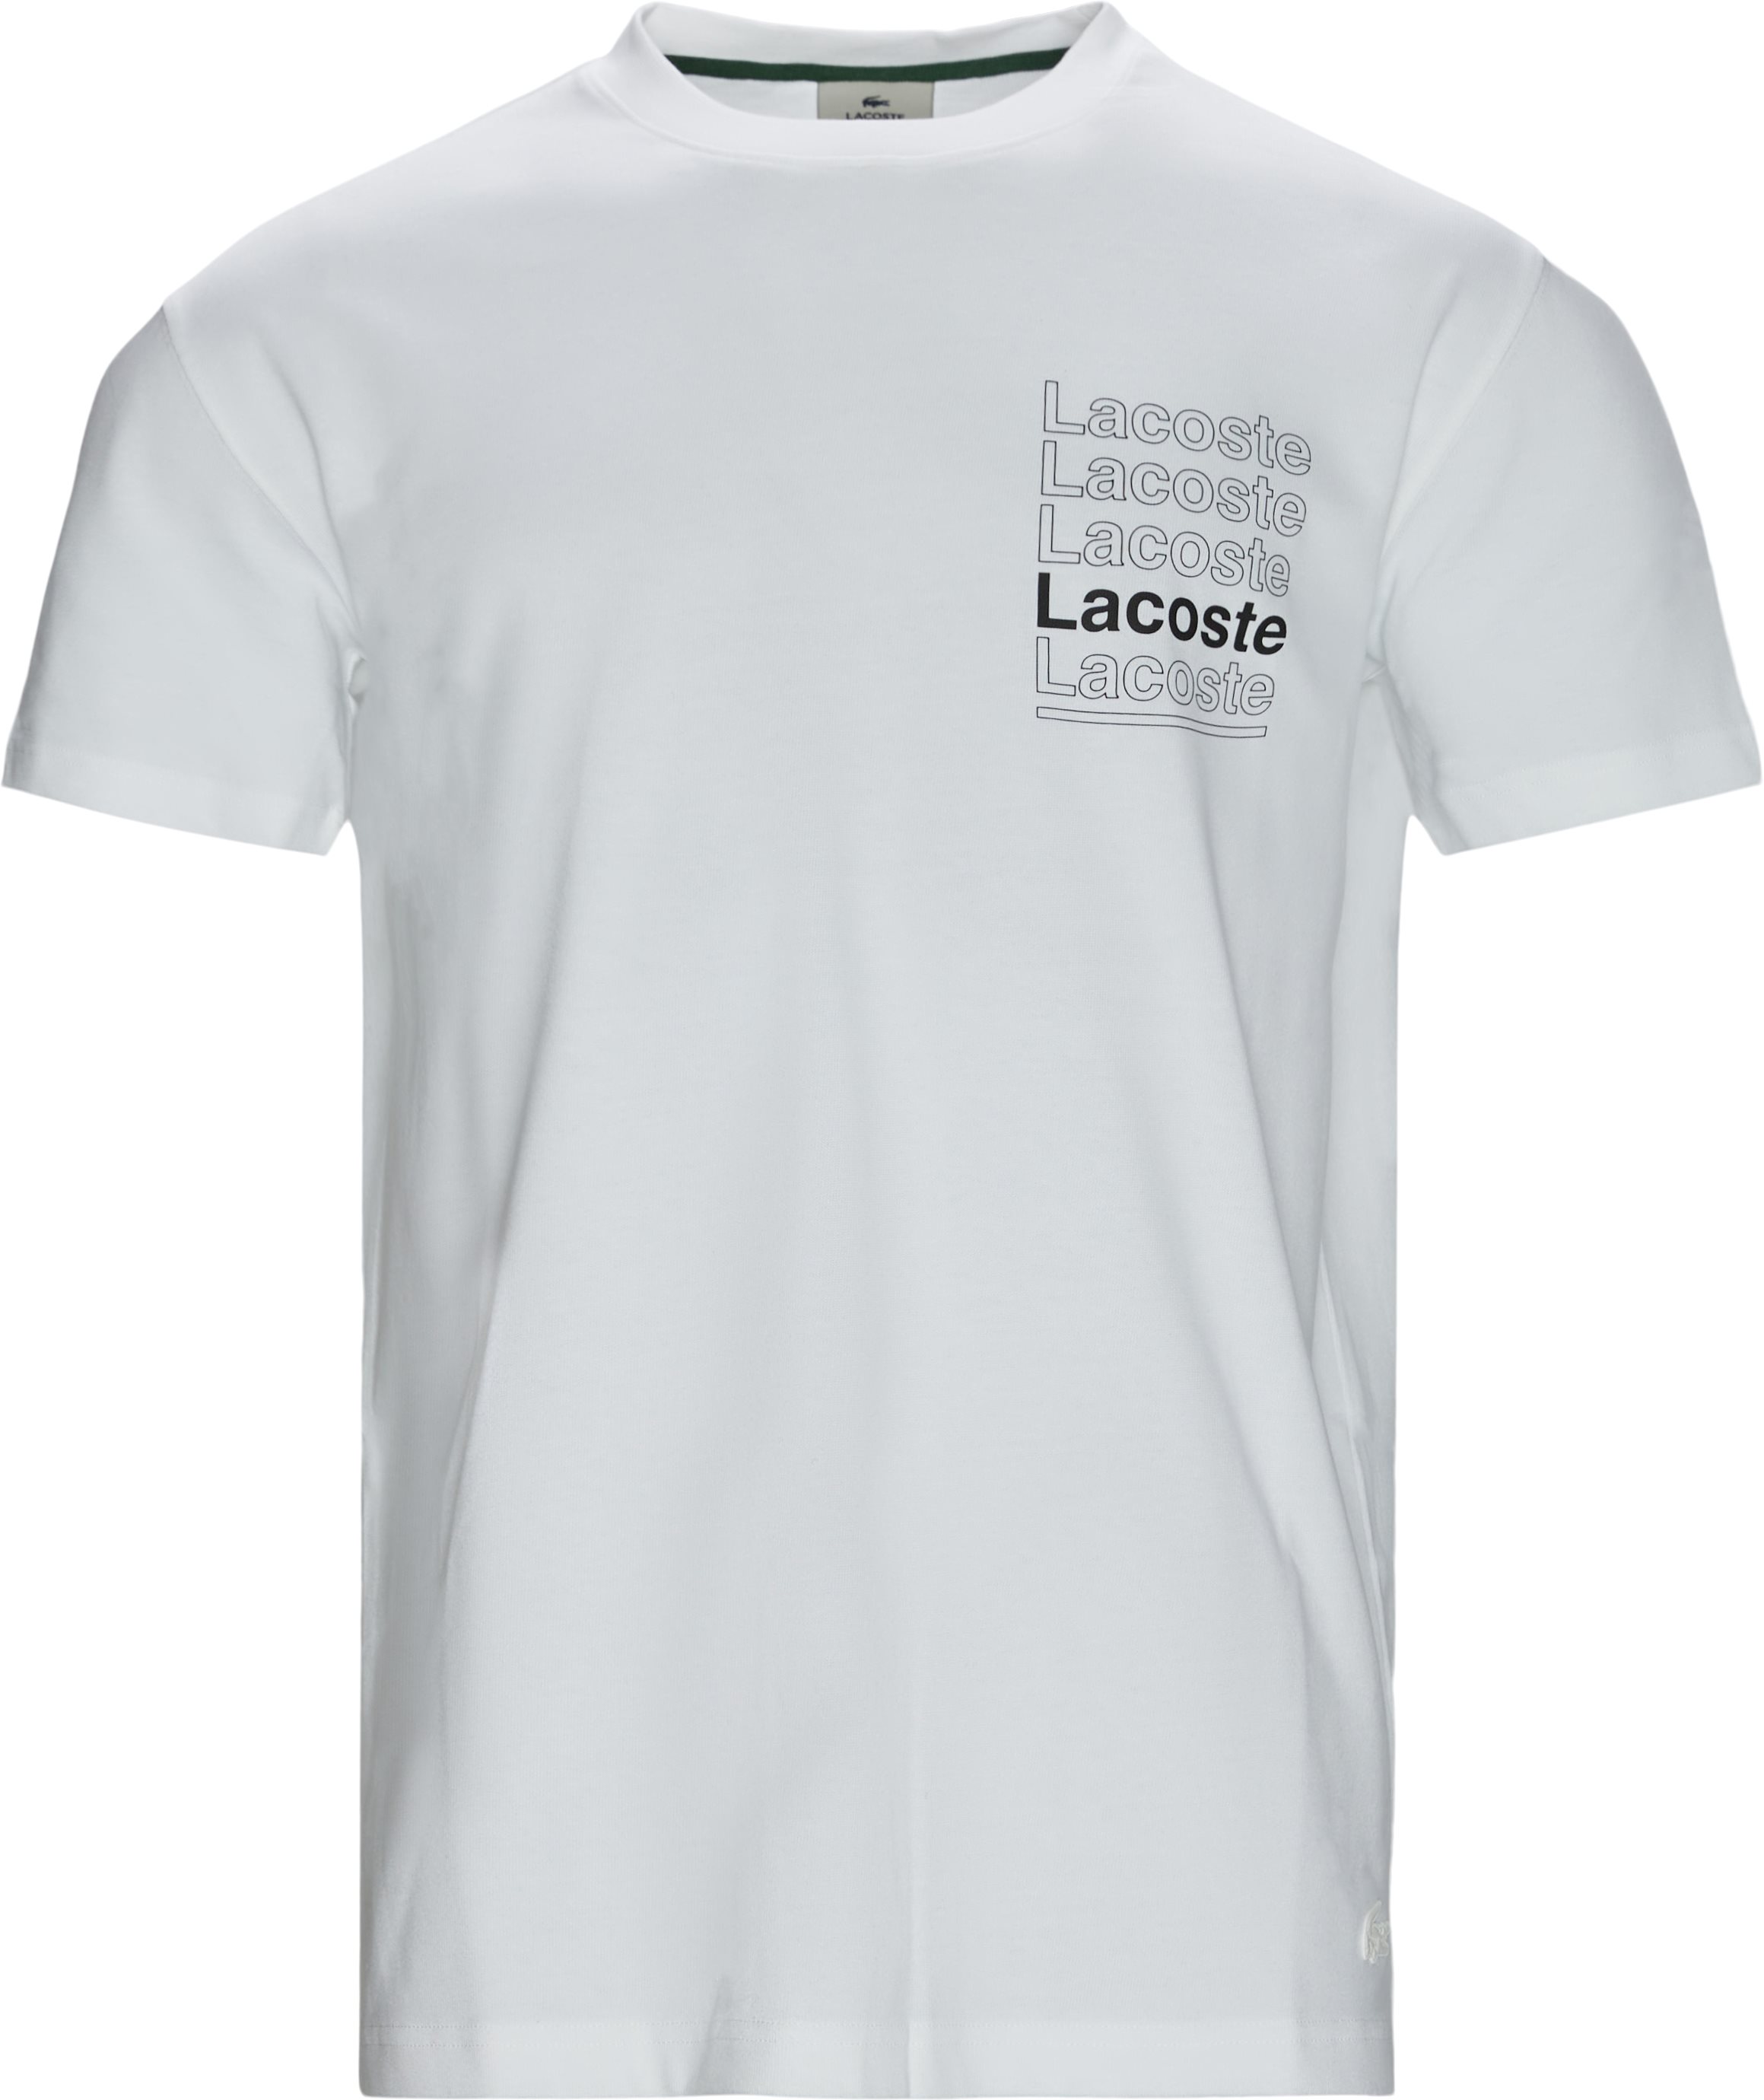 Lacoste T-shirts TH7293 Hvid